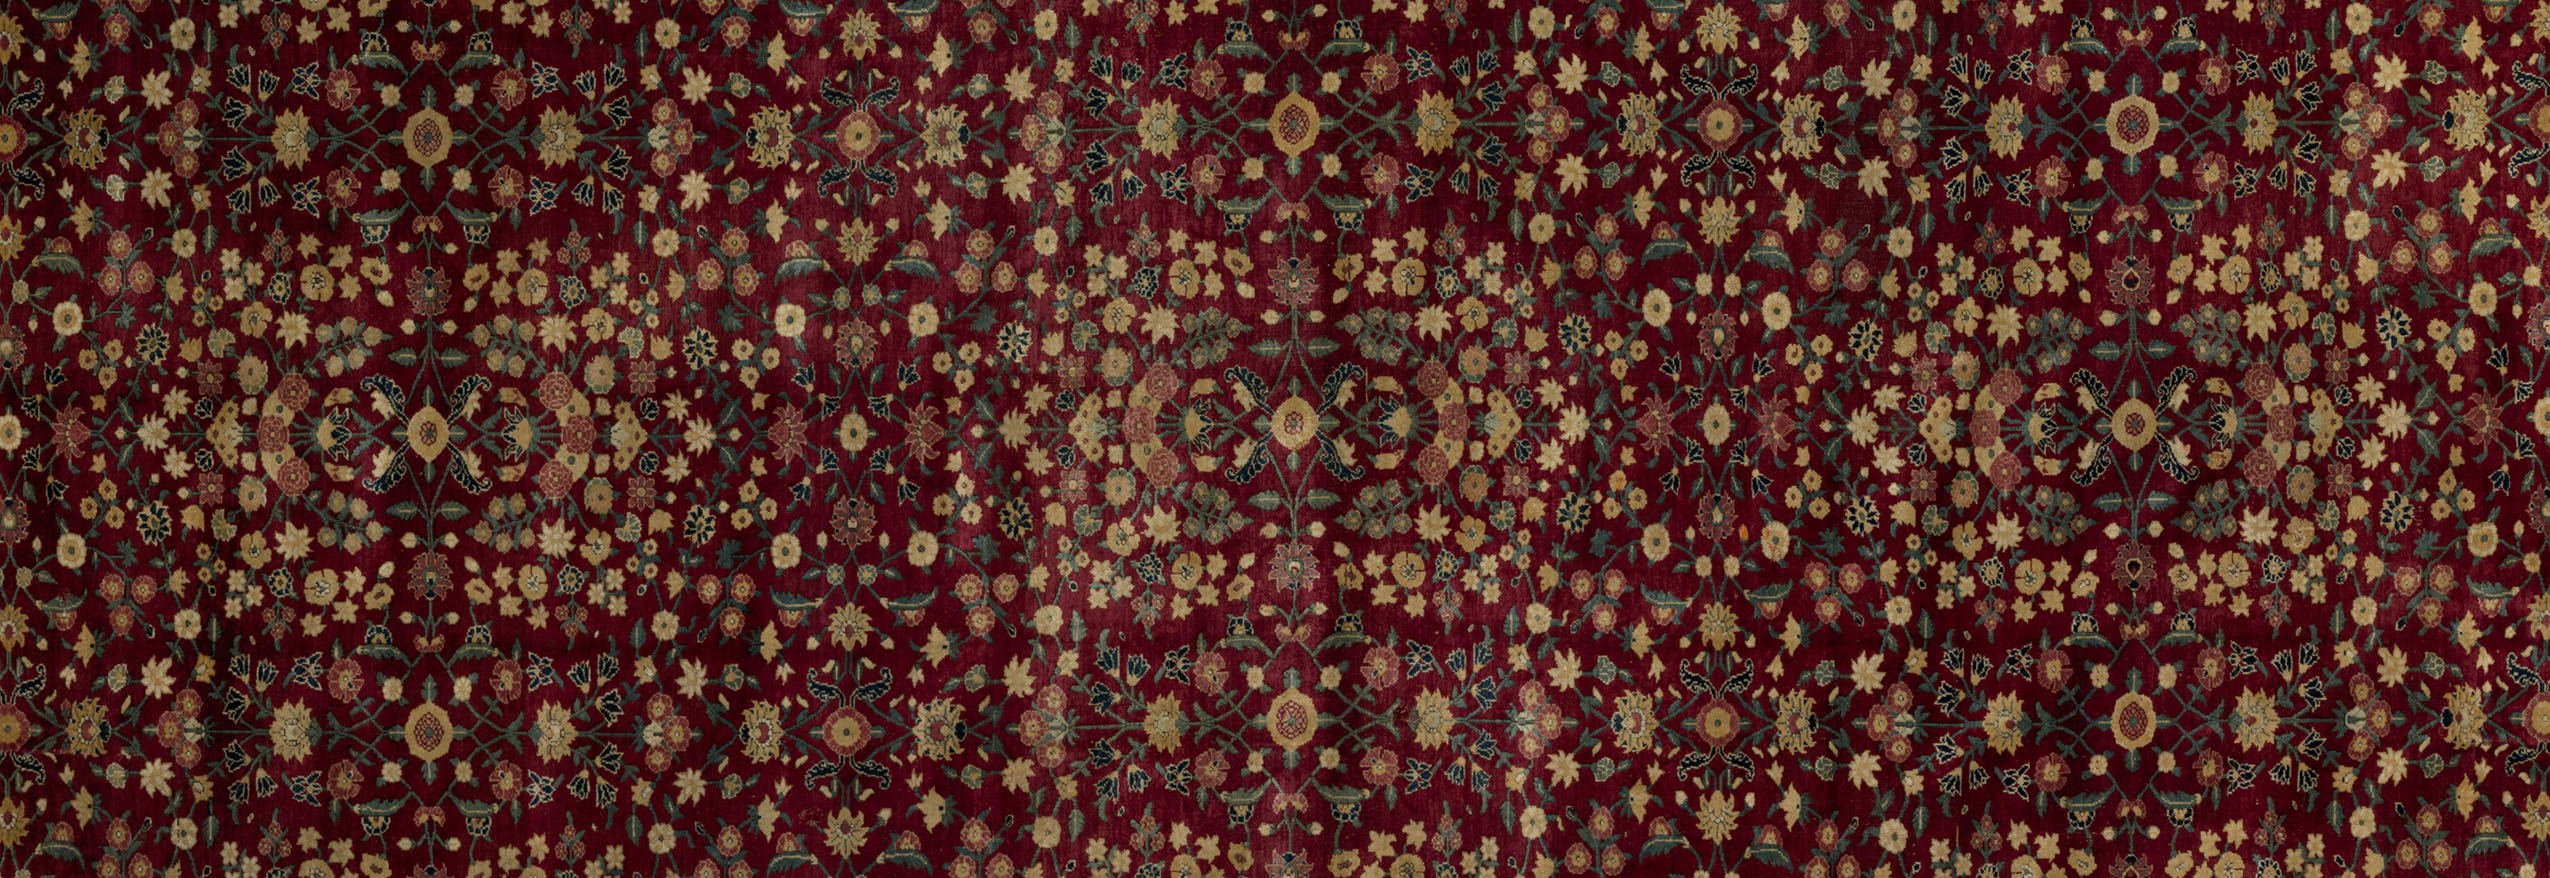 http://mapacademy.io/wp-content/uploads/2022/03/Hand-Woven-and-Hand-Knotted-Carpets-and-Rugs-Banner.jpg